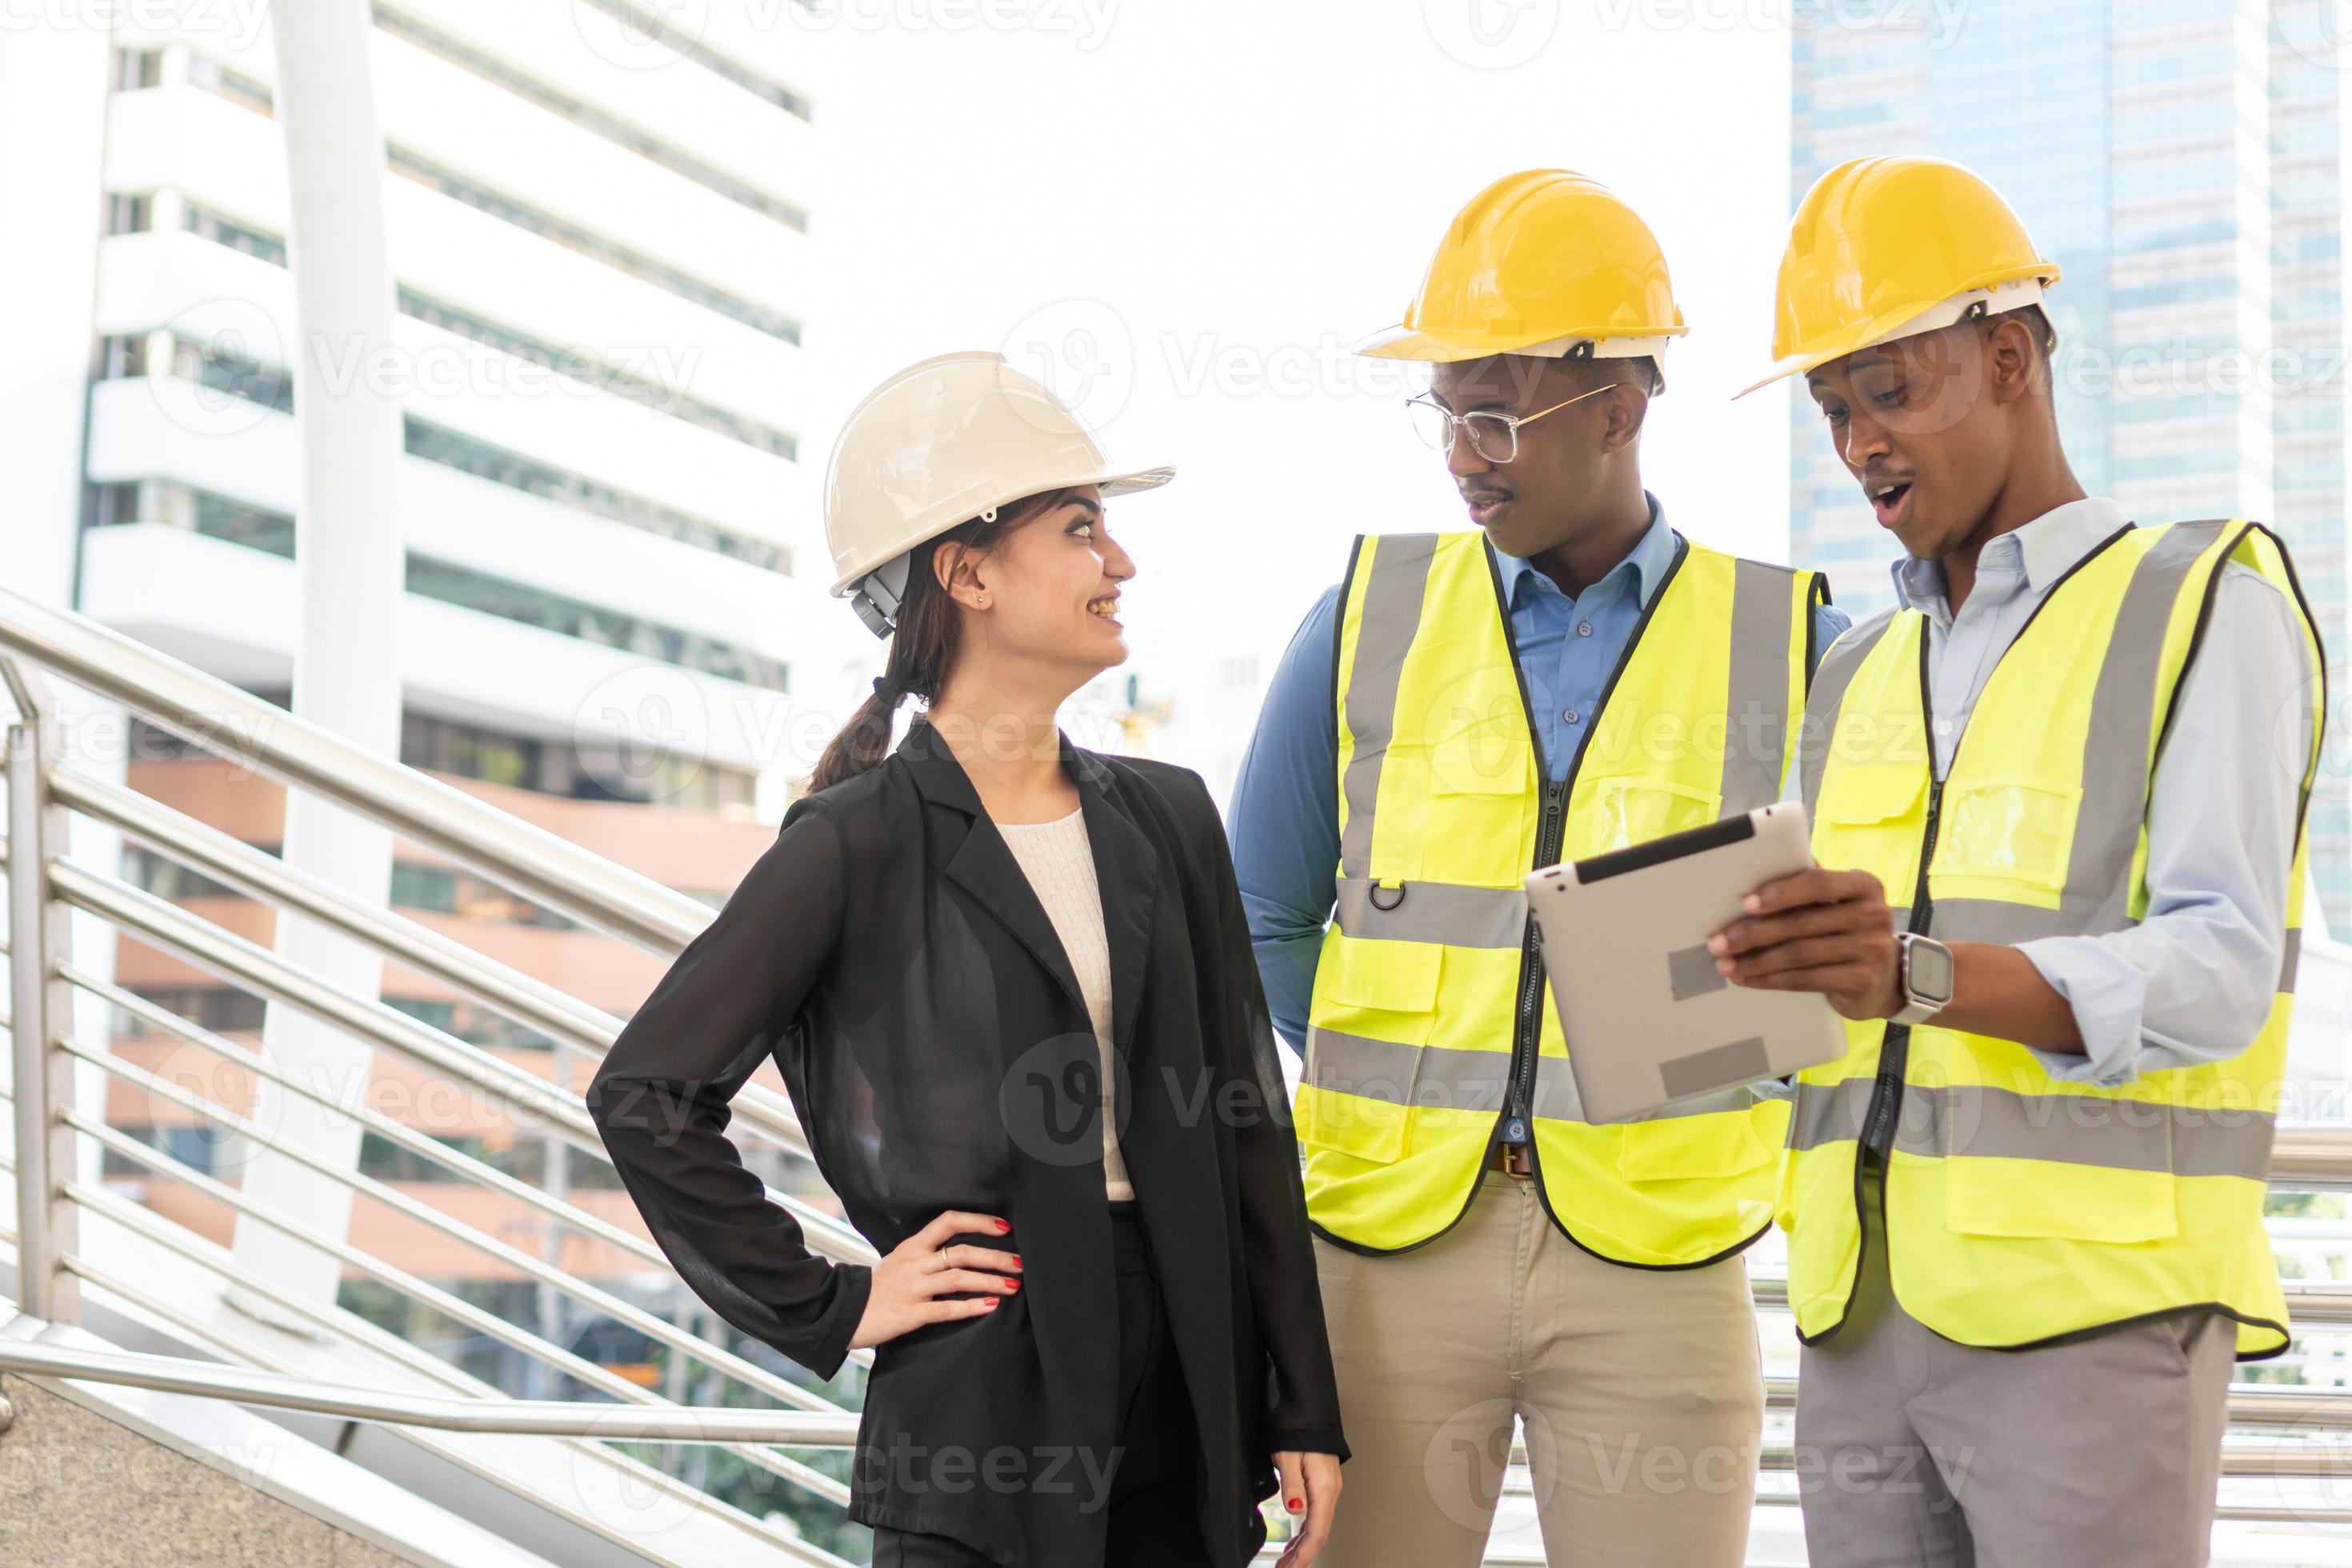 Group of Engineer Worker Wearing Safety Uniform and Hard Hat Uses